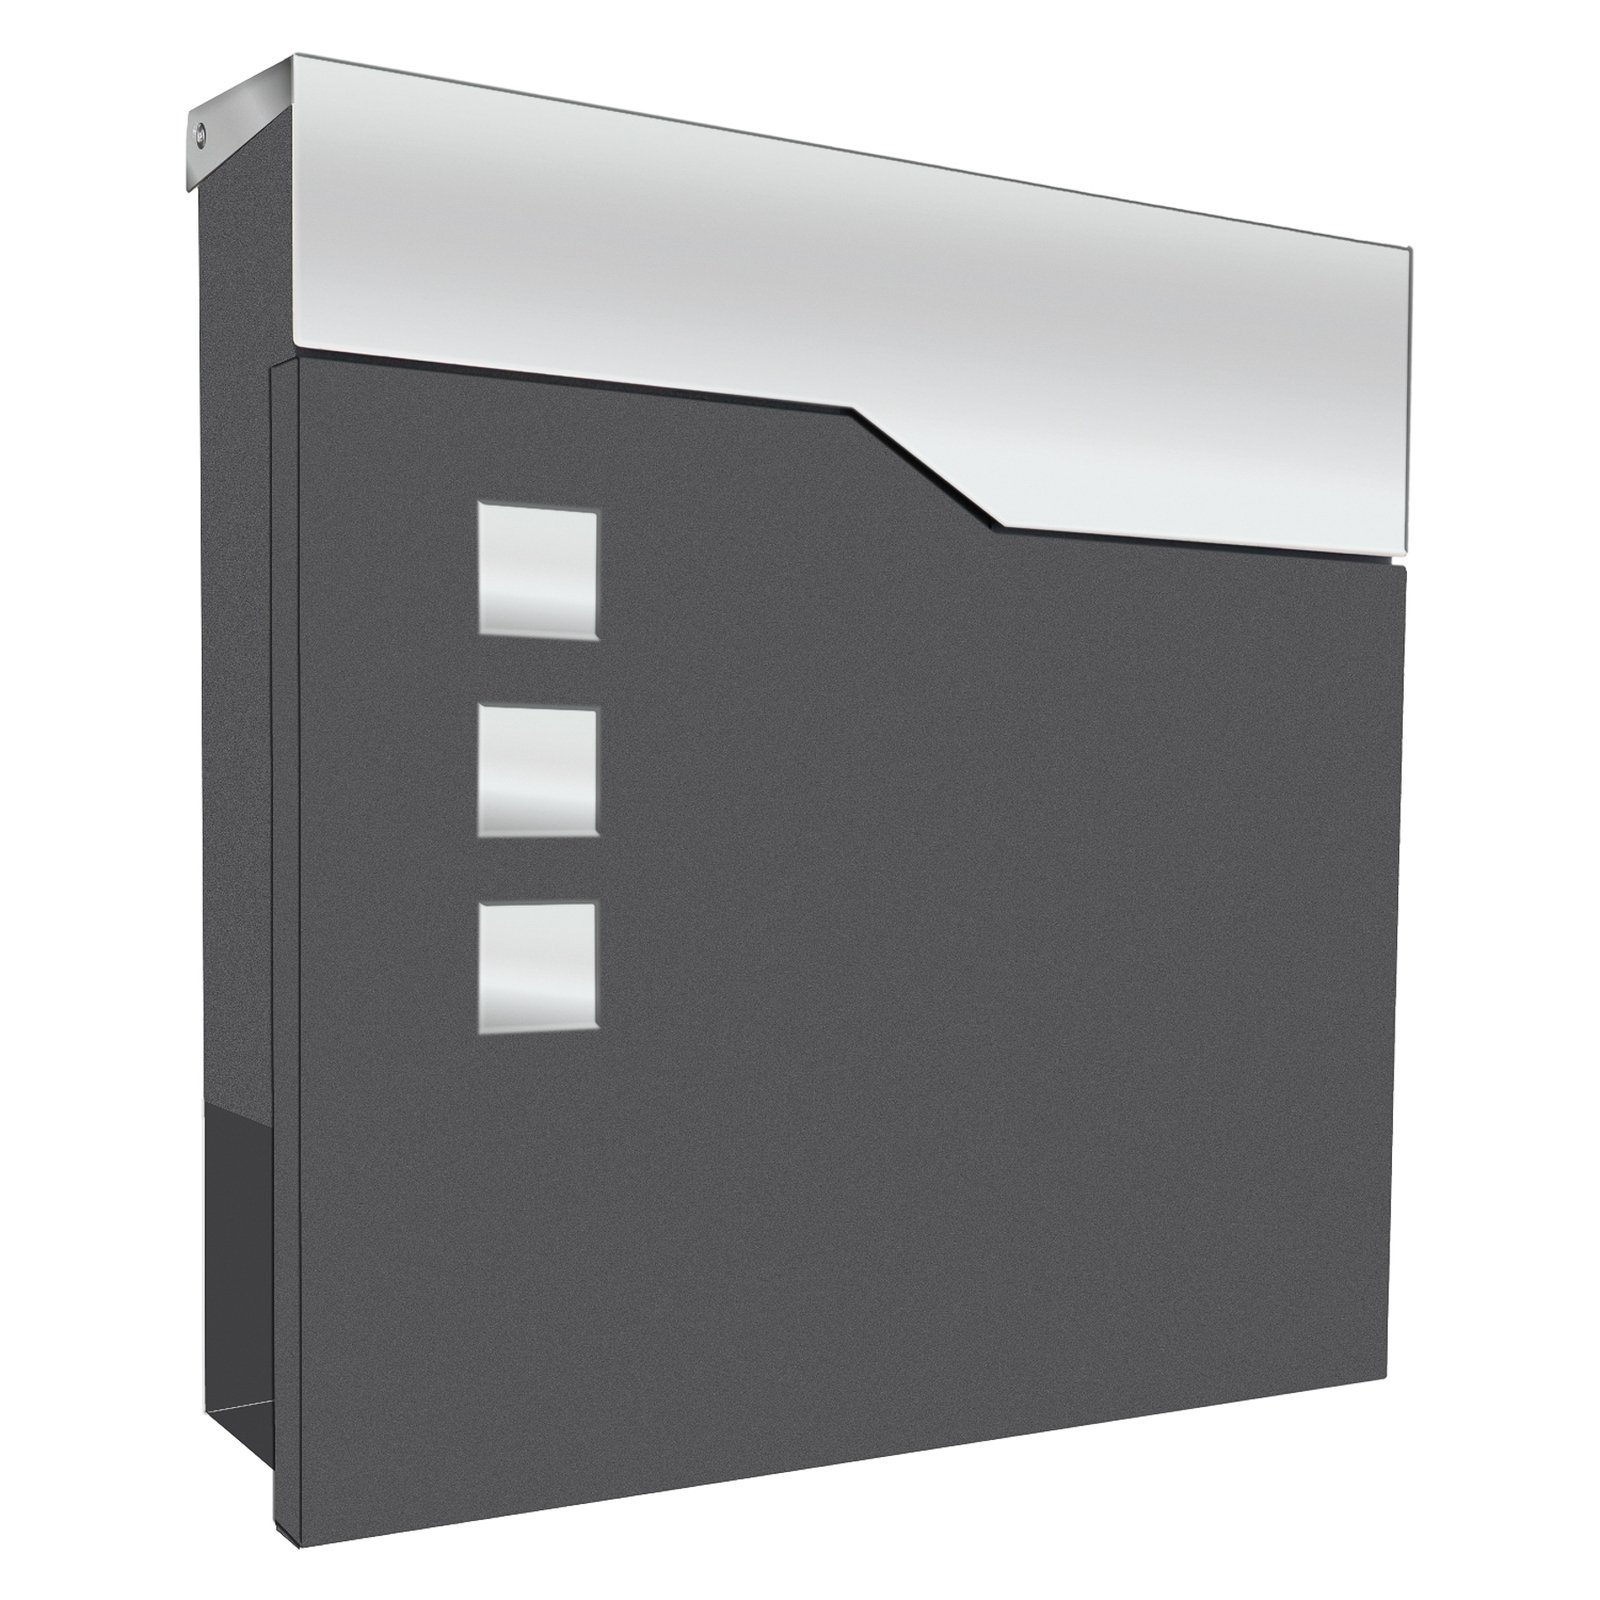 Wall-mounted letterbox 3037, newspaper compartment